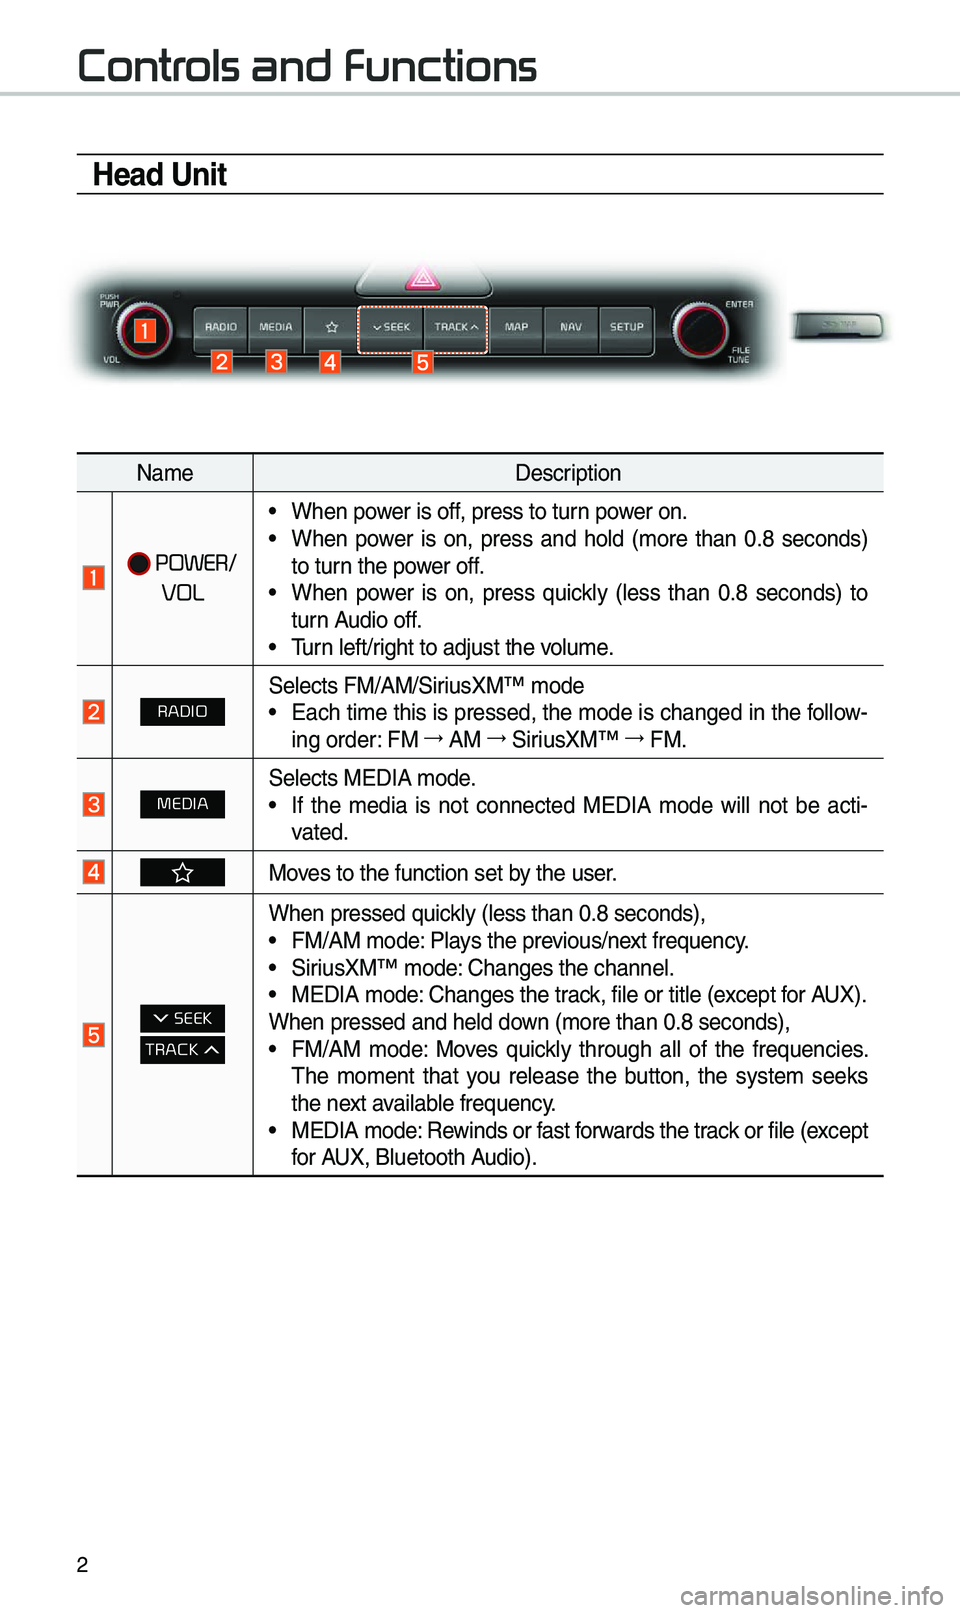 KIA SPORTAGE 2019  Navigation System Quick Reference Guide 2
Contr
Head Unit
Nam\fD\fscription
 POWER/ 
VOL  
• Wh\fn pow\fr is off, pr\fss to turn pow\fr on.• Wh\fn  pow\fr  is  on,  pr\fss  and  hold  (mor\f  than  0.8  s\fconds) 
to turn th\f pow\fr of